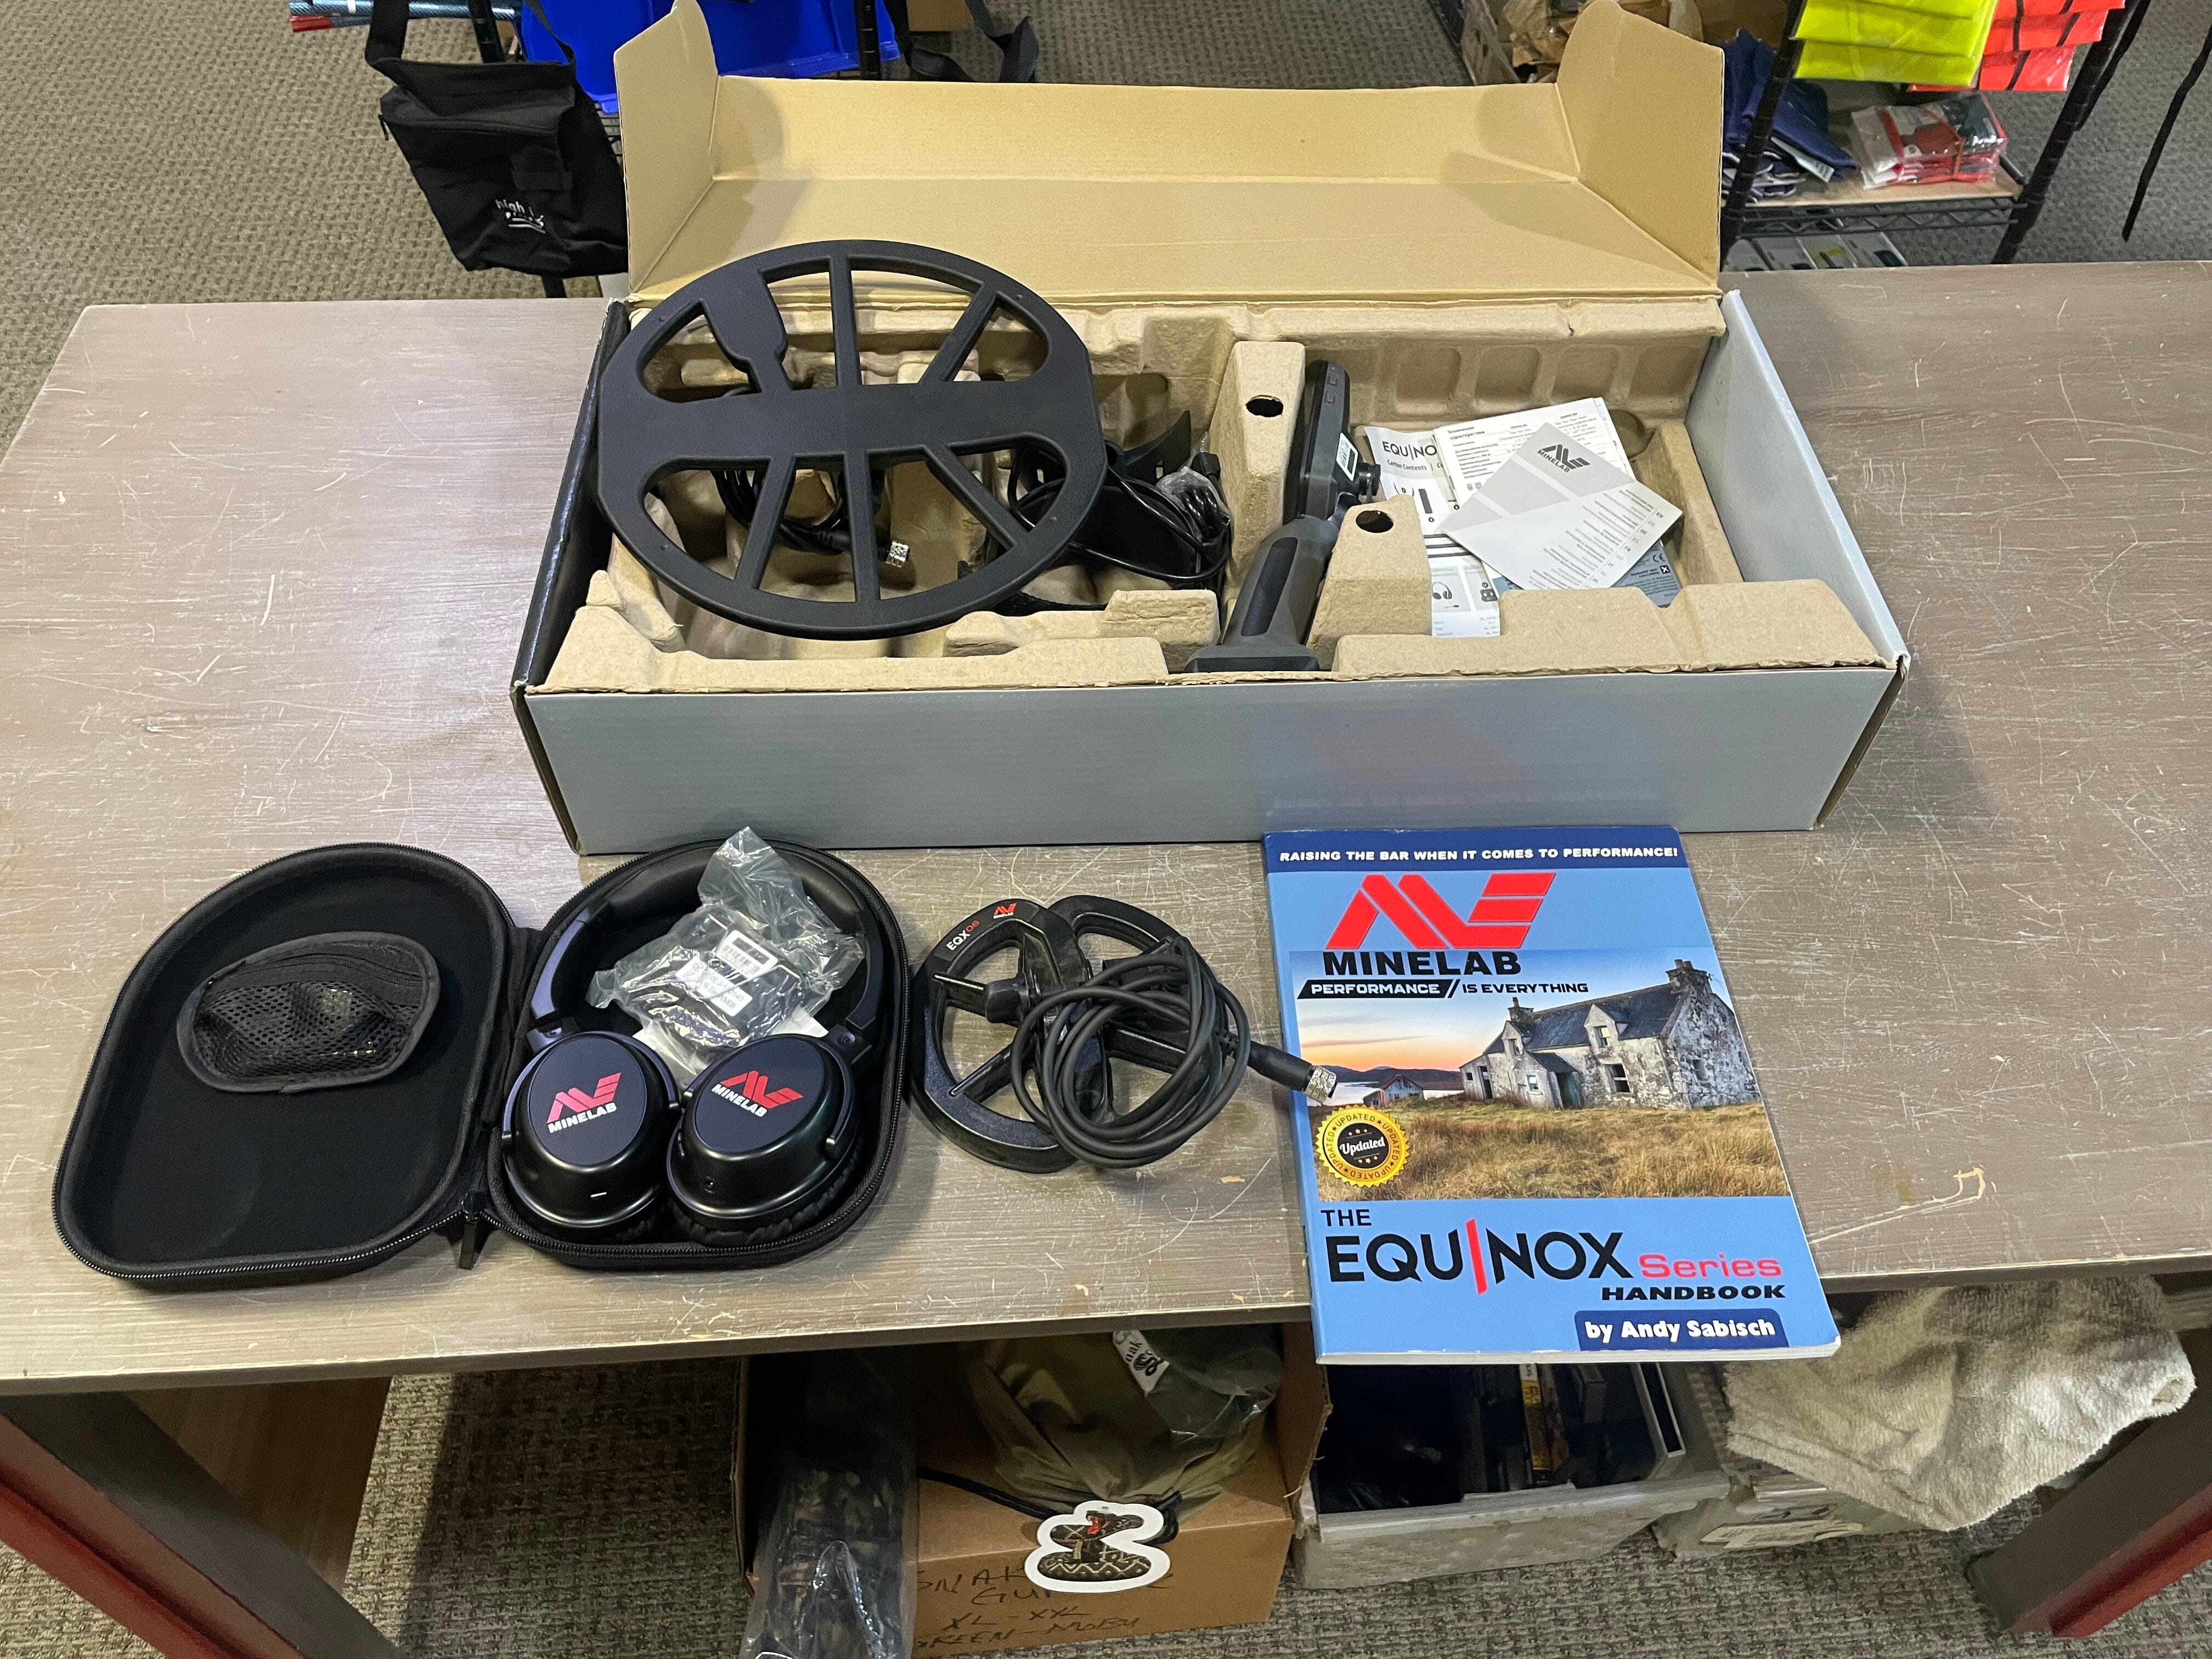 Used/Trade in -  Minelab Equinox 800 Waterproof Metal Detector With Wireless Headphones, Extra 6" Coil and Equinox Handbook by Andy Sabisch